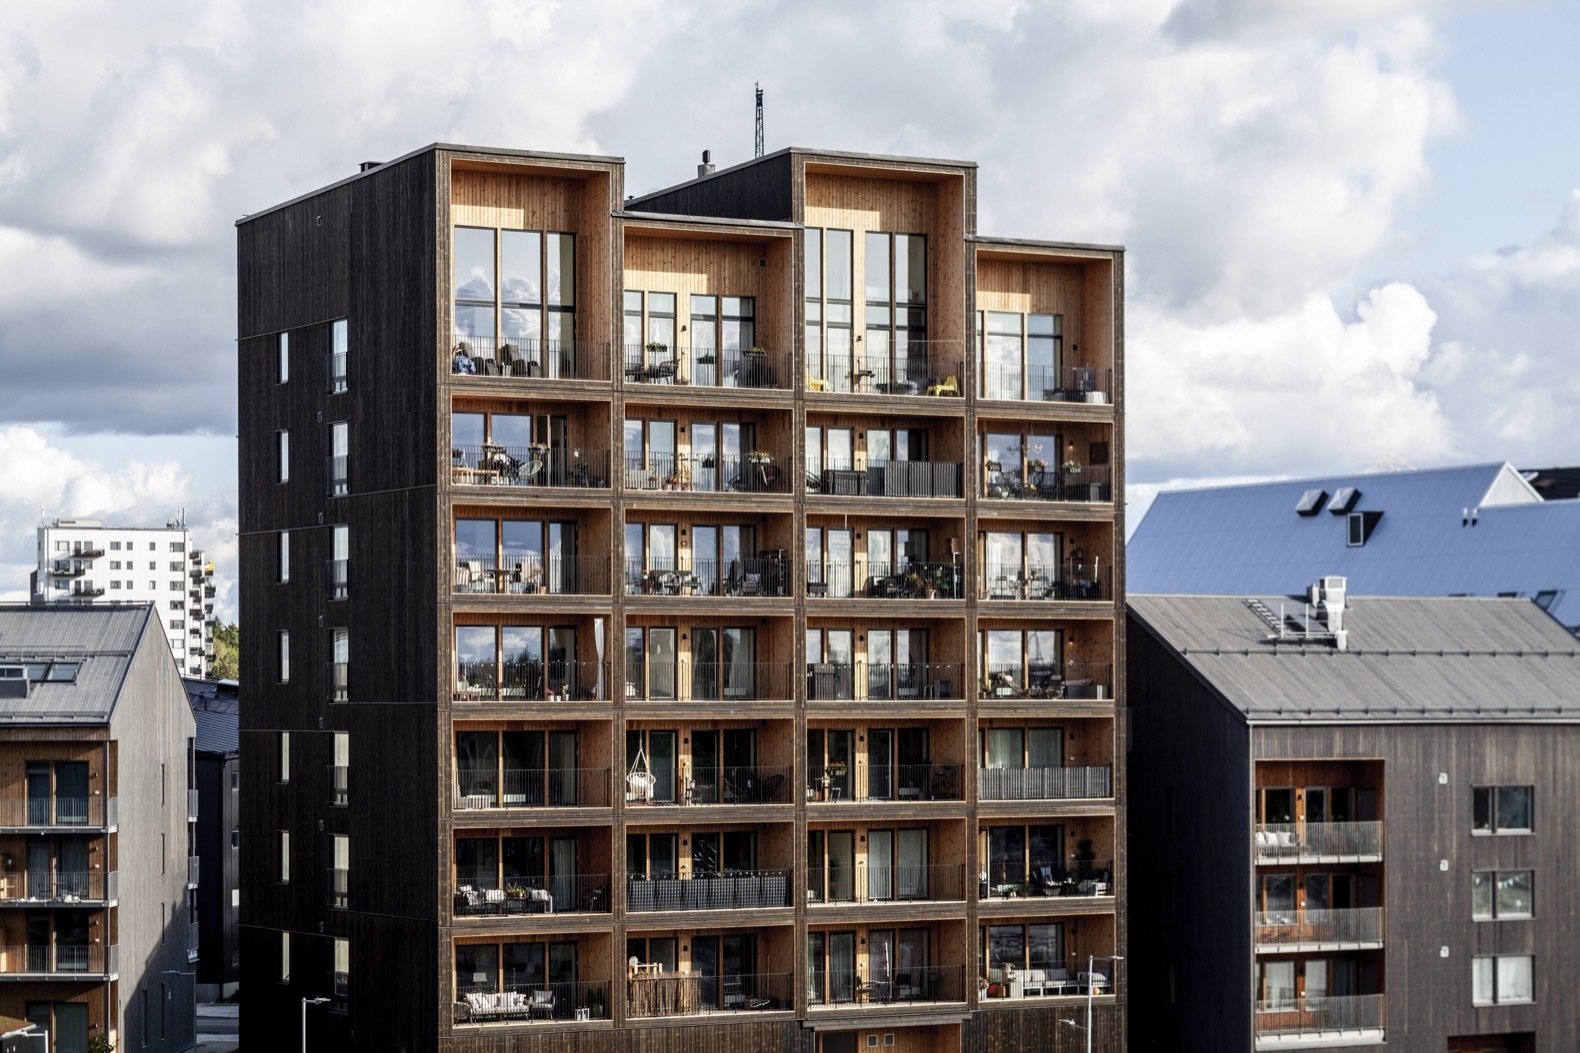 The Kajstaden Tall Timber Building has nine floors with an elevated ground floor and a double-height top floor. C.F. Møller Architects designed the building in collaboration with Martinsons, Bjerking and Consto AB, for client Slättö Förvaltning.